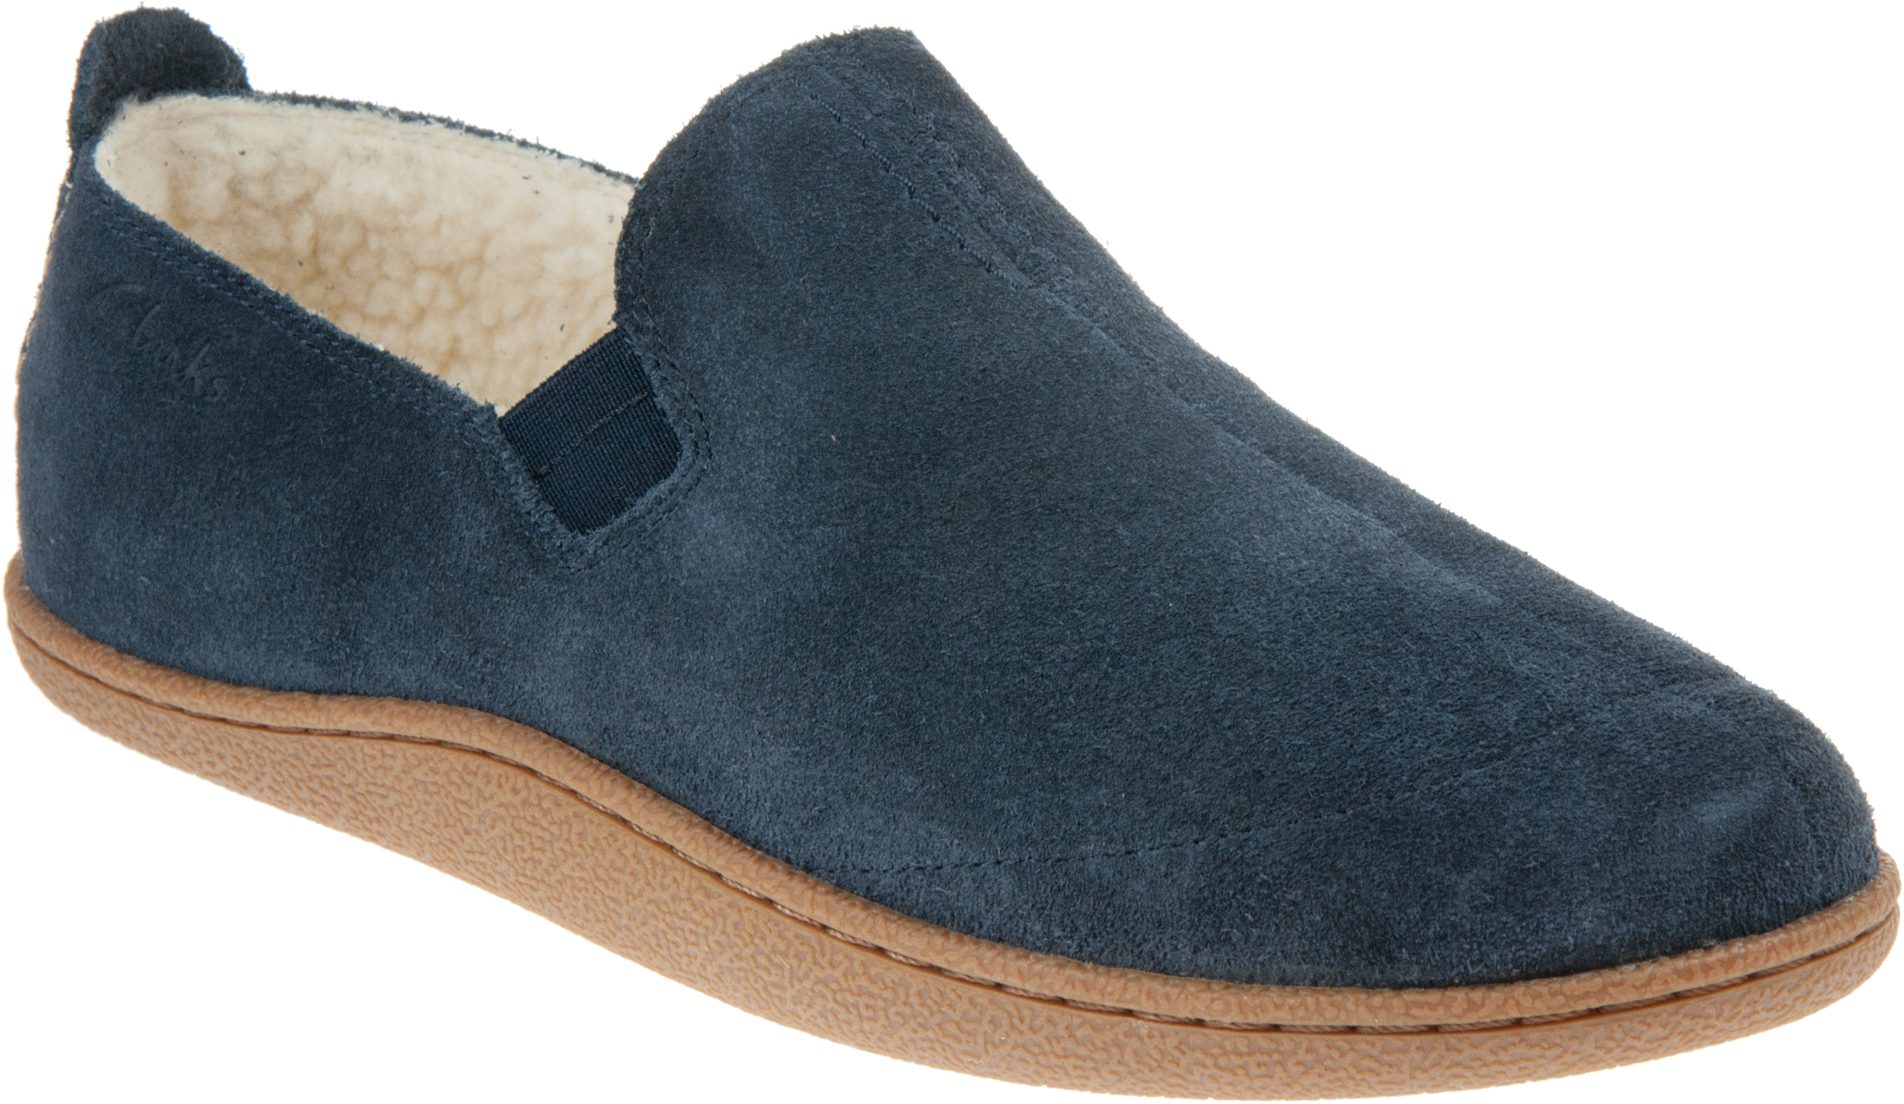 Clarks Home Mocc Navy Suede 26164248 - Full Slippers - Humphries Shoes